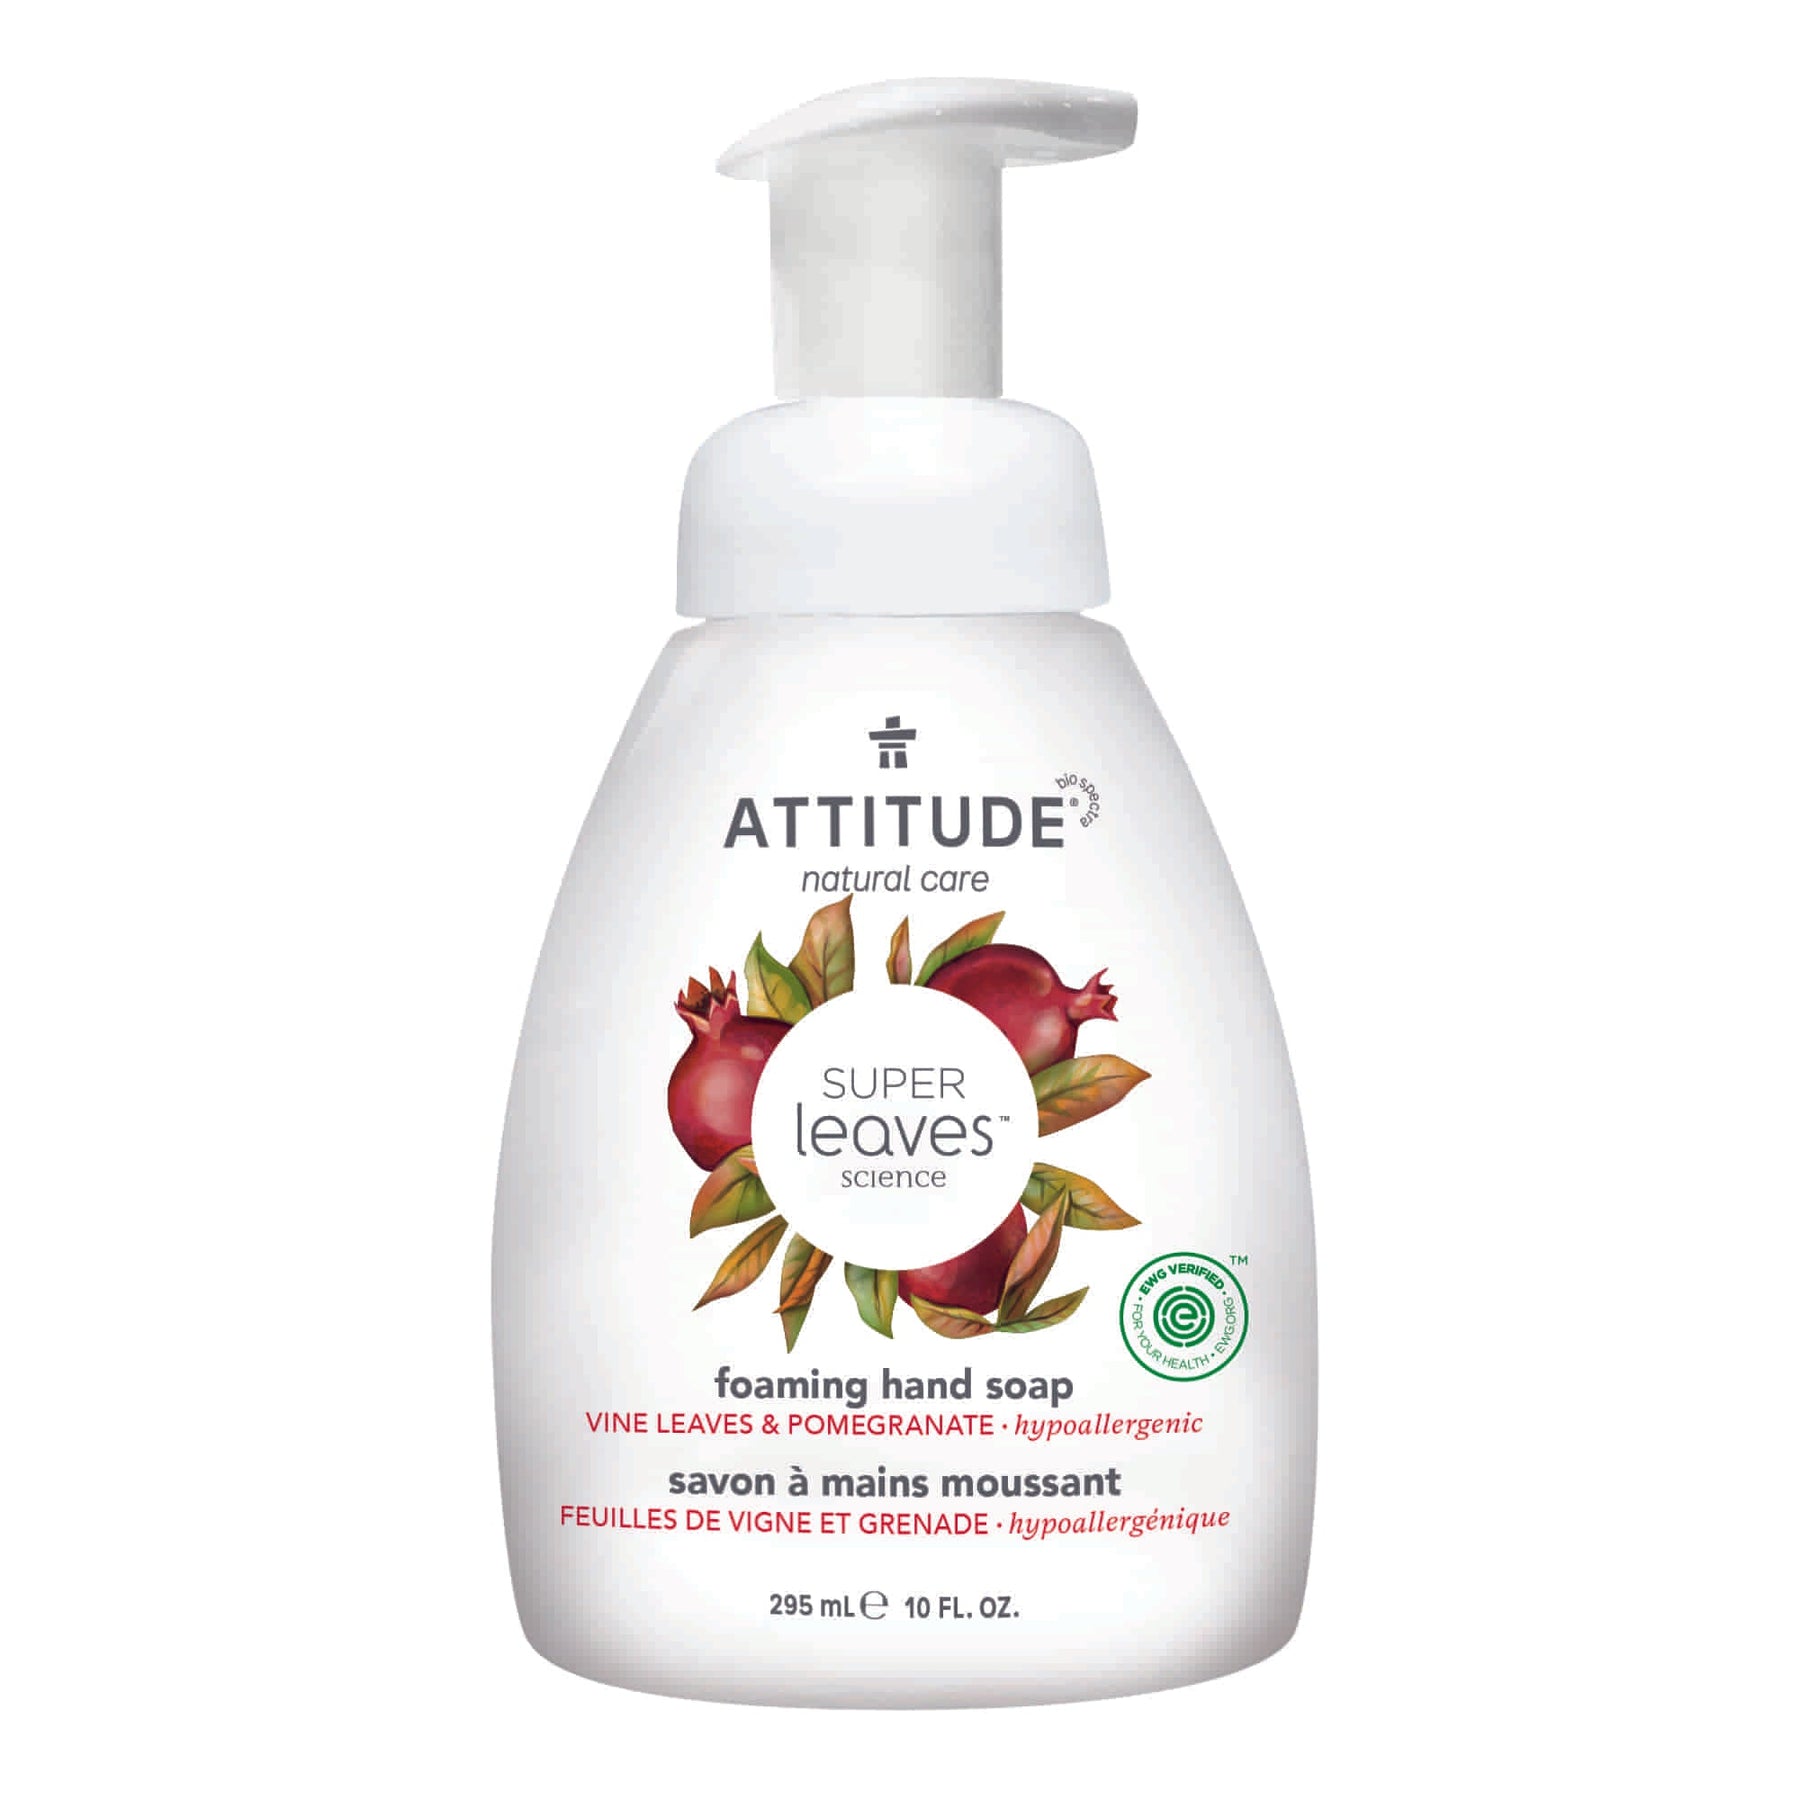 Foaming Hand Soap : SUPER LEAVES™ - Vine Leaves and pomegranate / 295 mL - by Attitude |ProCare Outlet|